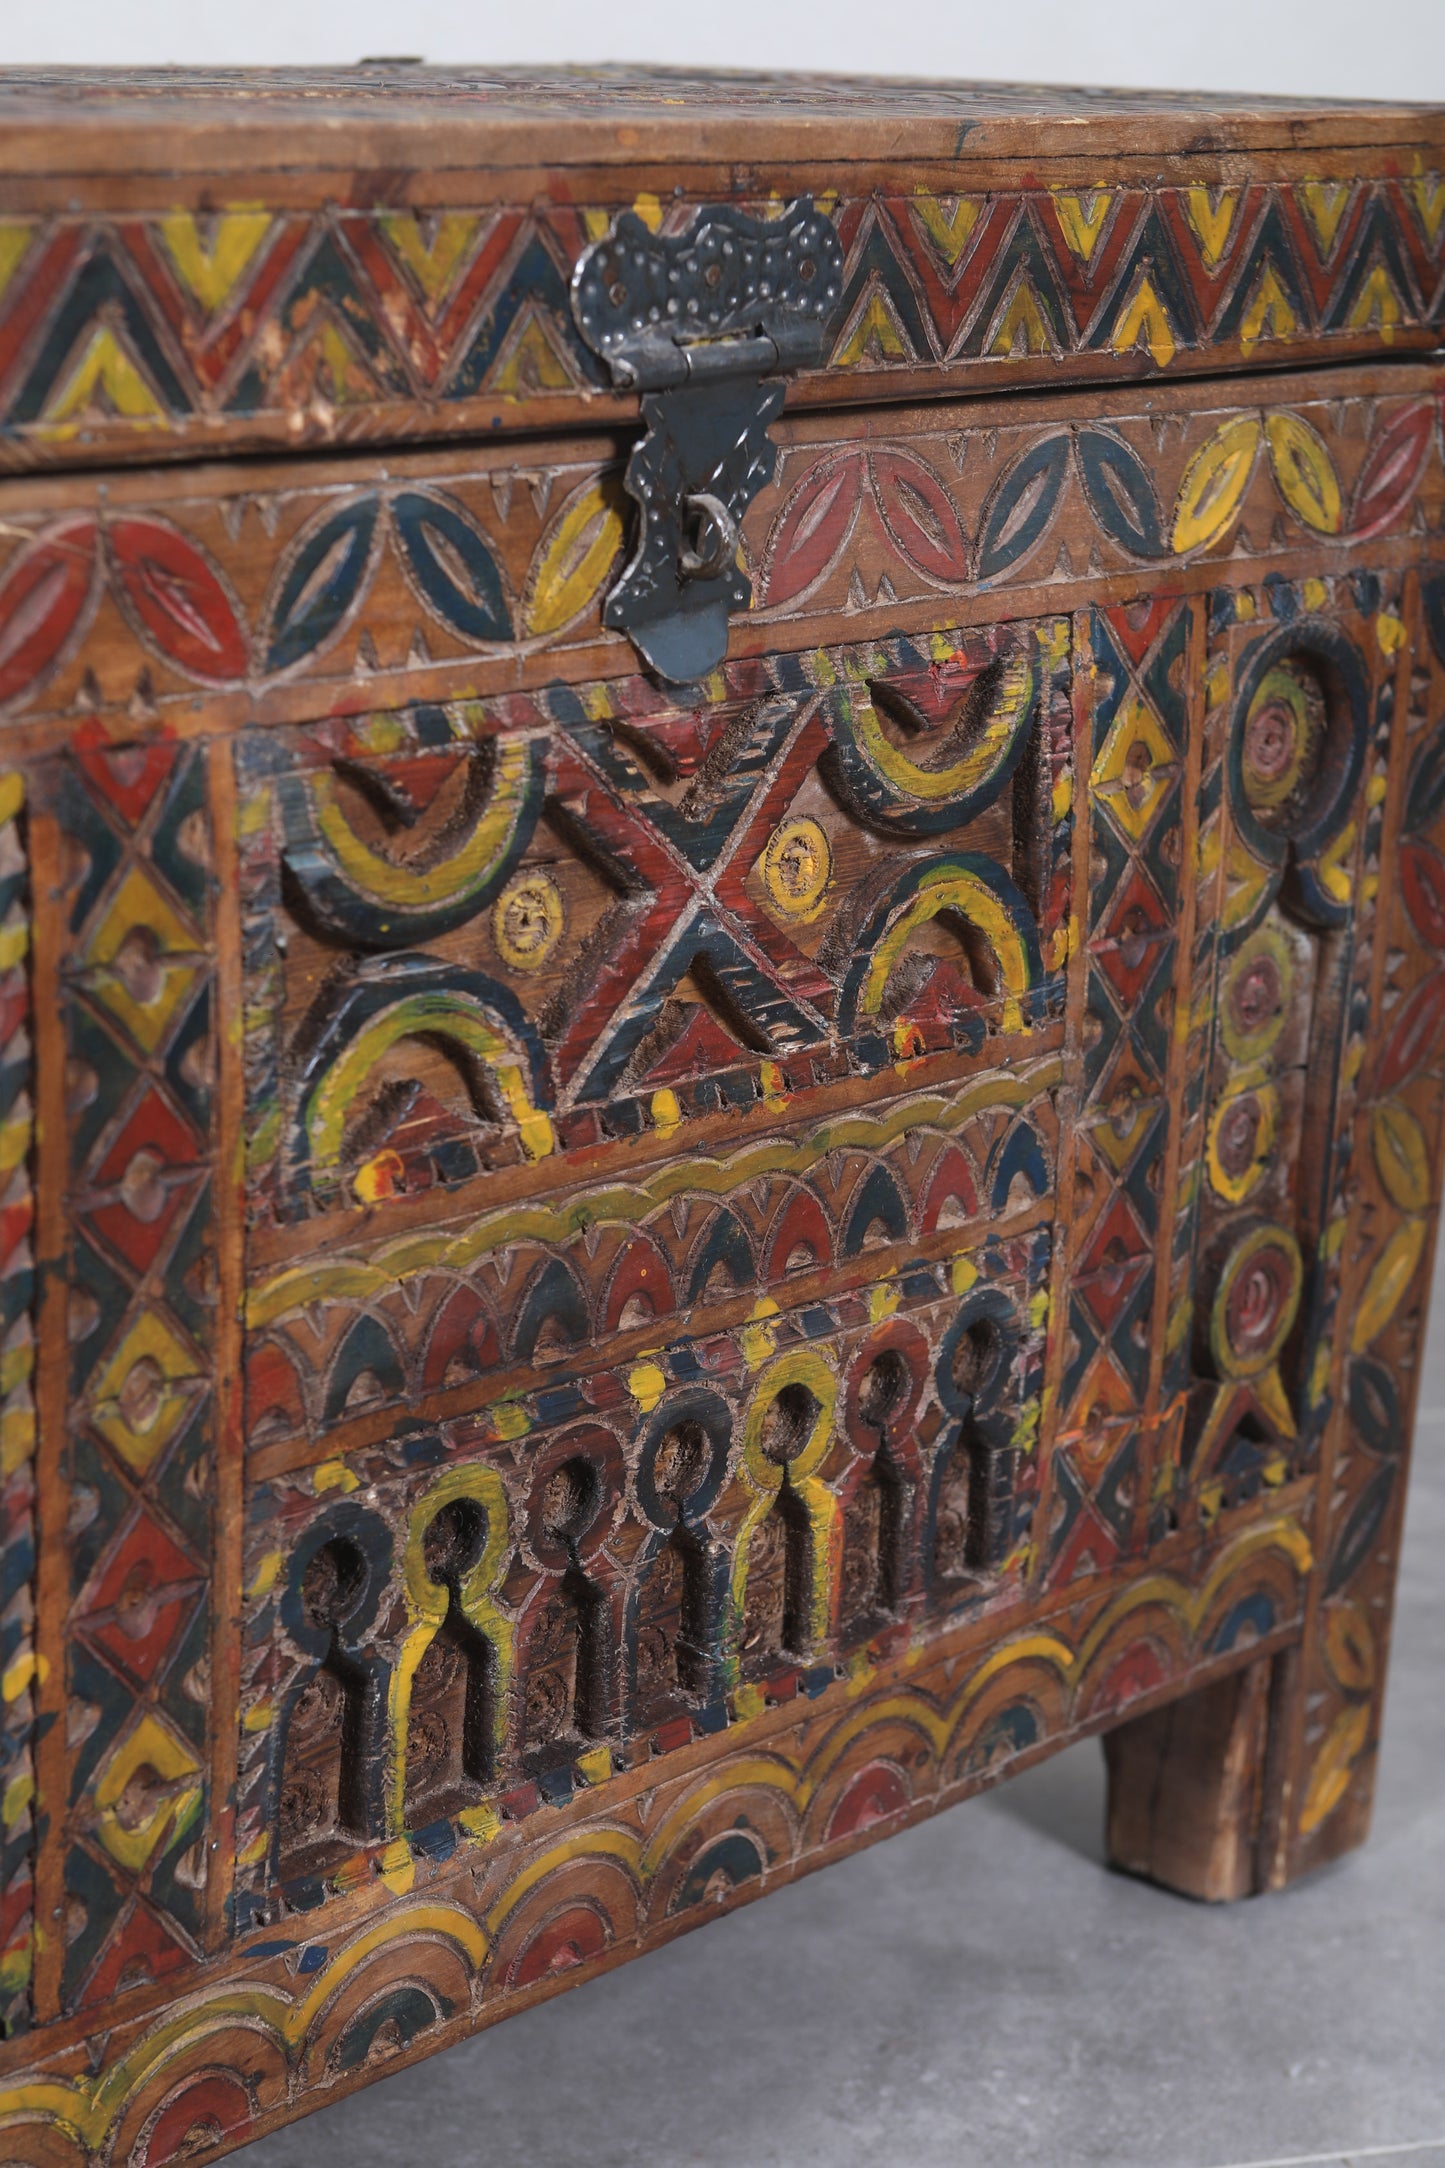 Vintage Moroccan chest  H 23.6 INCHES X W 29.9 INCHES X D 15.7 INCHES